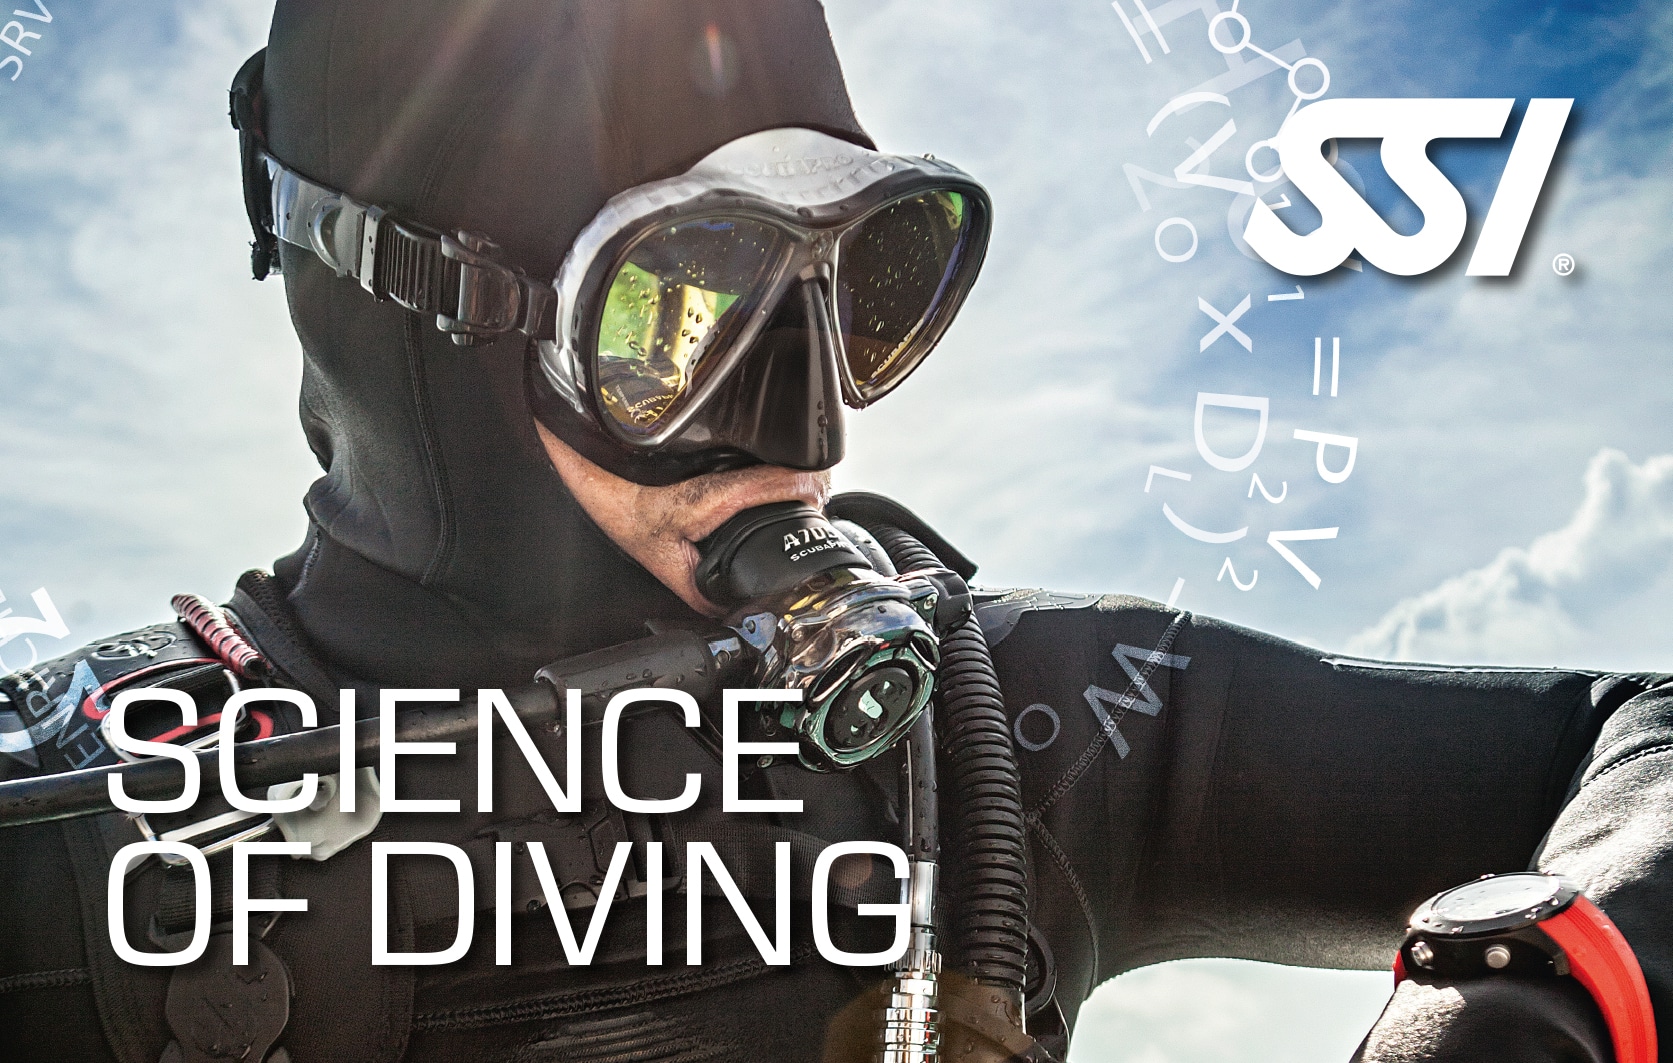 SSI Science of Diving Zertifikation